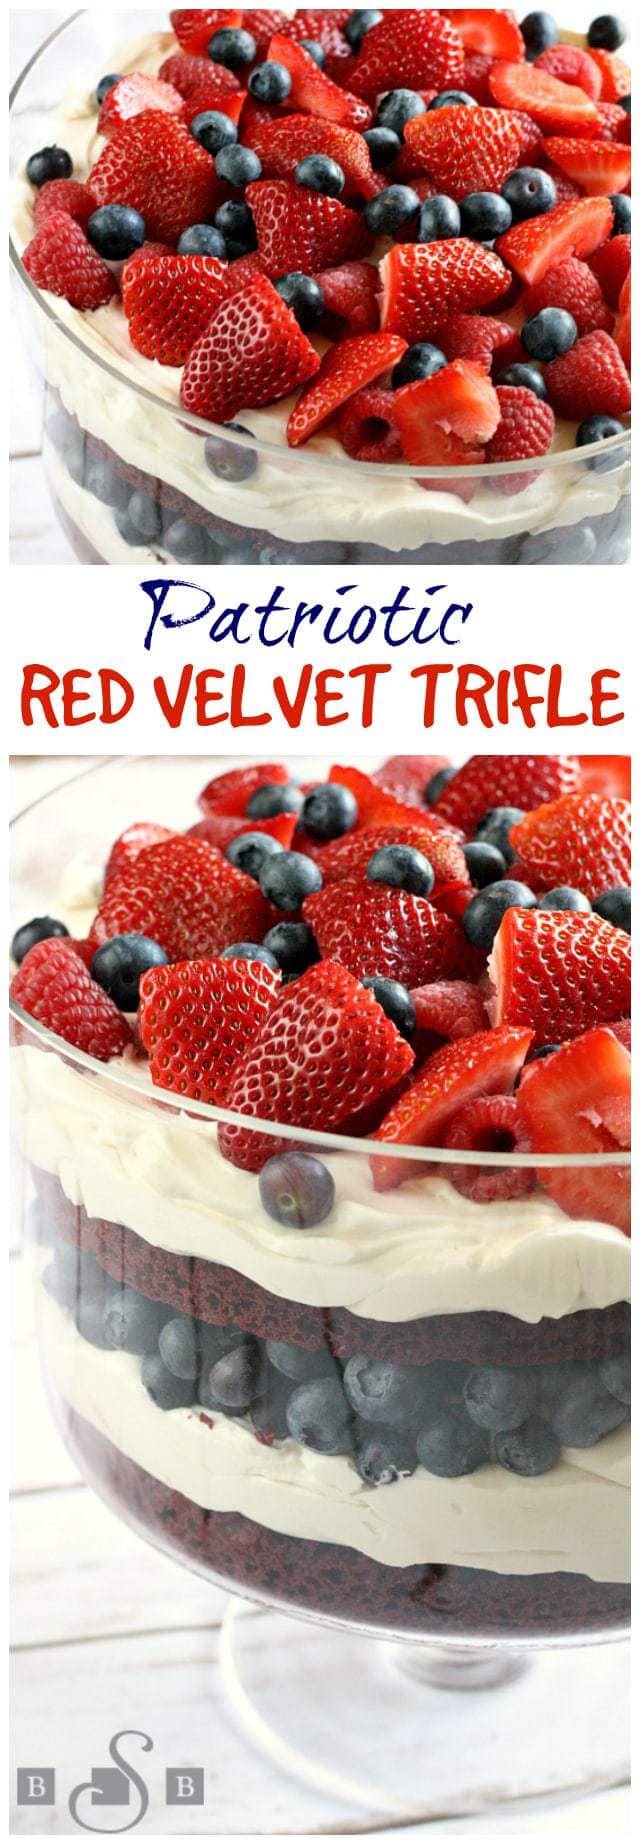 I love making trifles because they look so fancy, but they are so easy to put together! I had never made one with red velvet cake before, but it is the perfect base for a patriotic dessert, especially when topped off with blueberries, raspberries and strawberries! I just used a boxed mix for the cake and it turned out to be an amazing dessert!